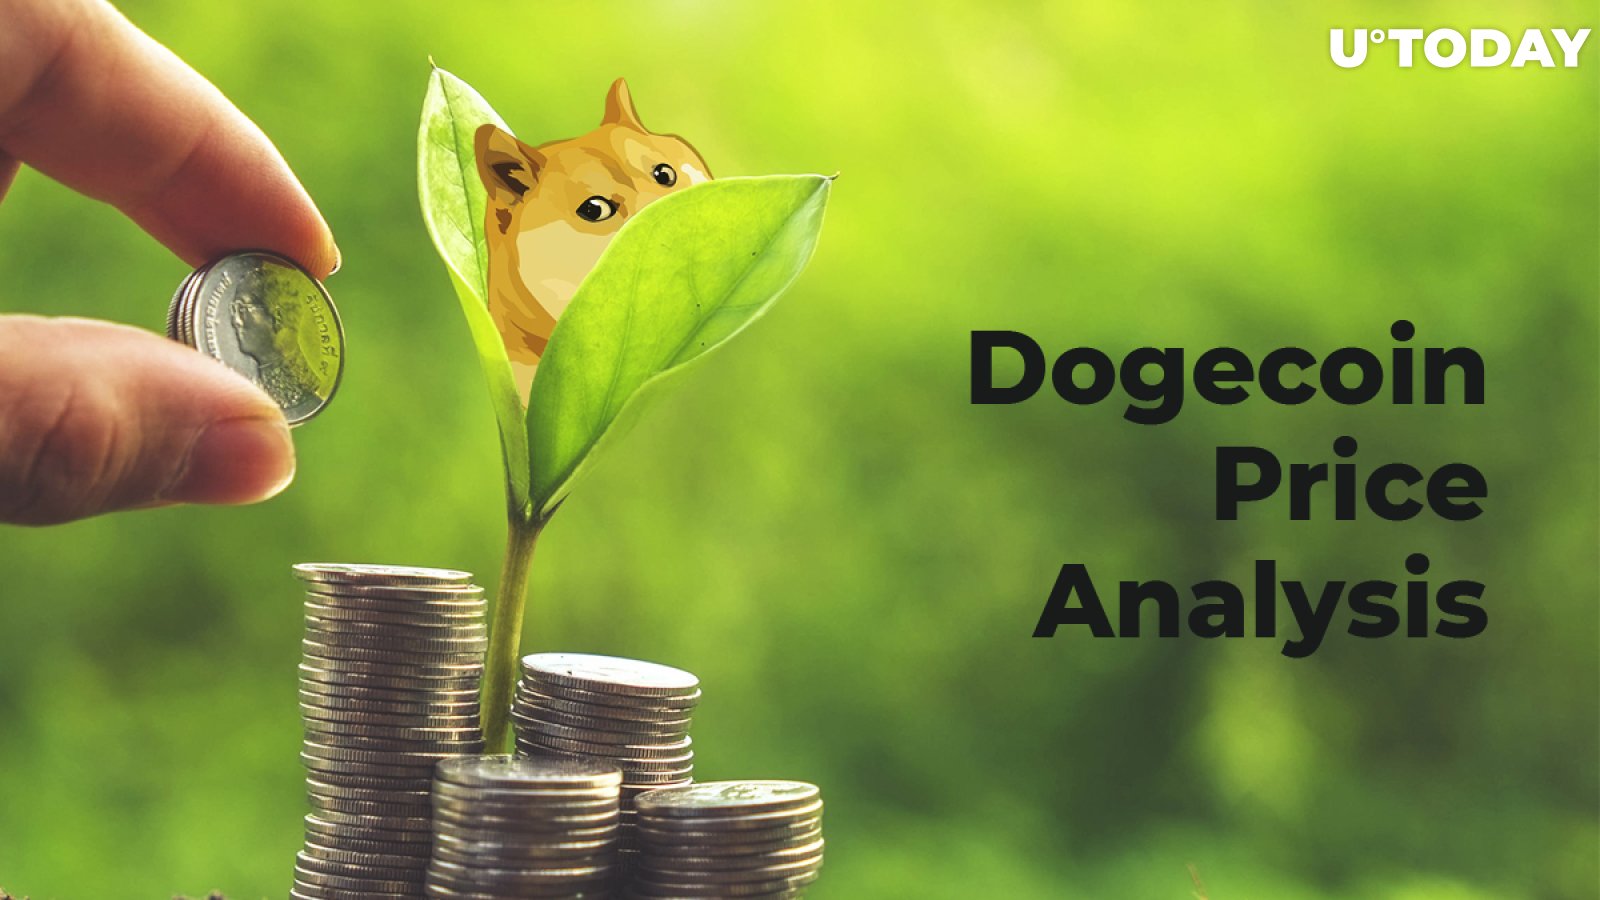 Dogecoin Price Analysis 2019 — Is Long-Term Growth Possible?